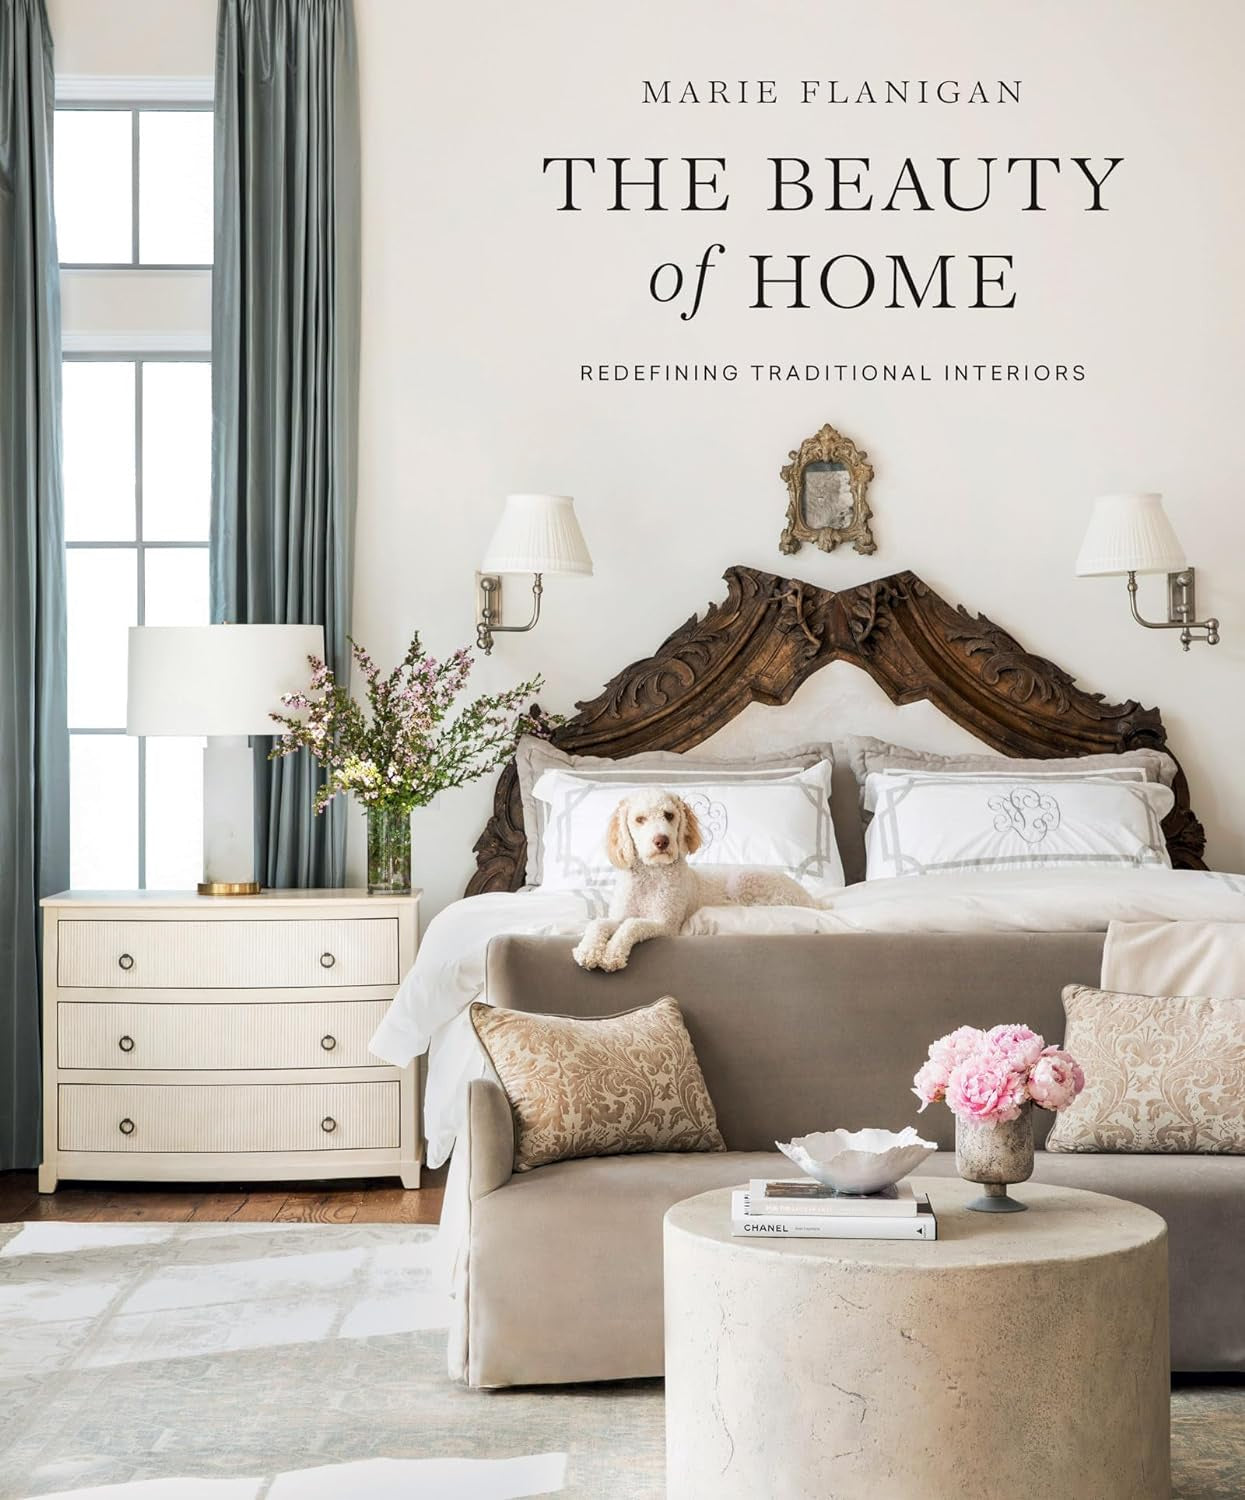 Elegant bedroom interior featuring a large bed with neutral bedding, an ornate wooden headboard, a side table with a lamp in Arizona style, and a dog sitting on the floor. Light decor with a title overlay "The Beauty of Home" by Gibbs Smith Publisher.